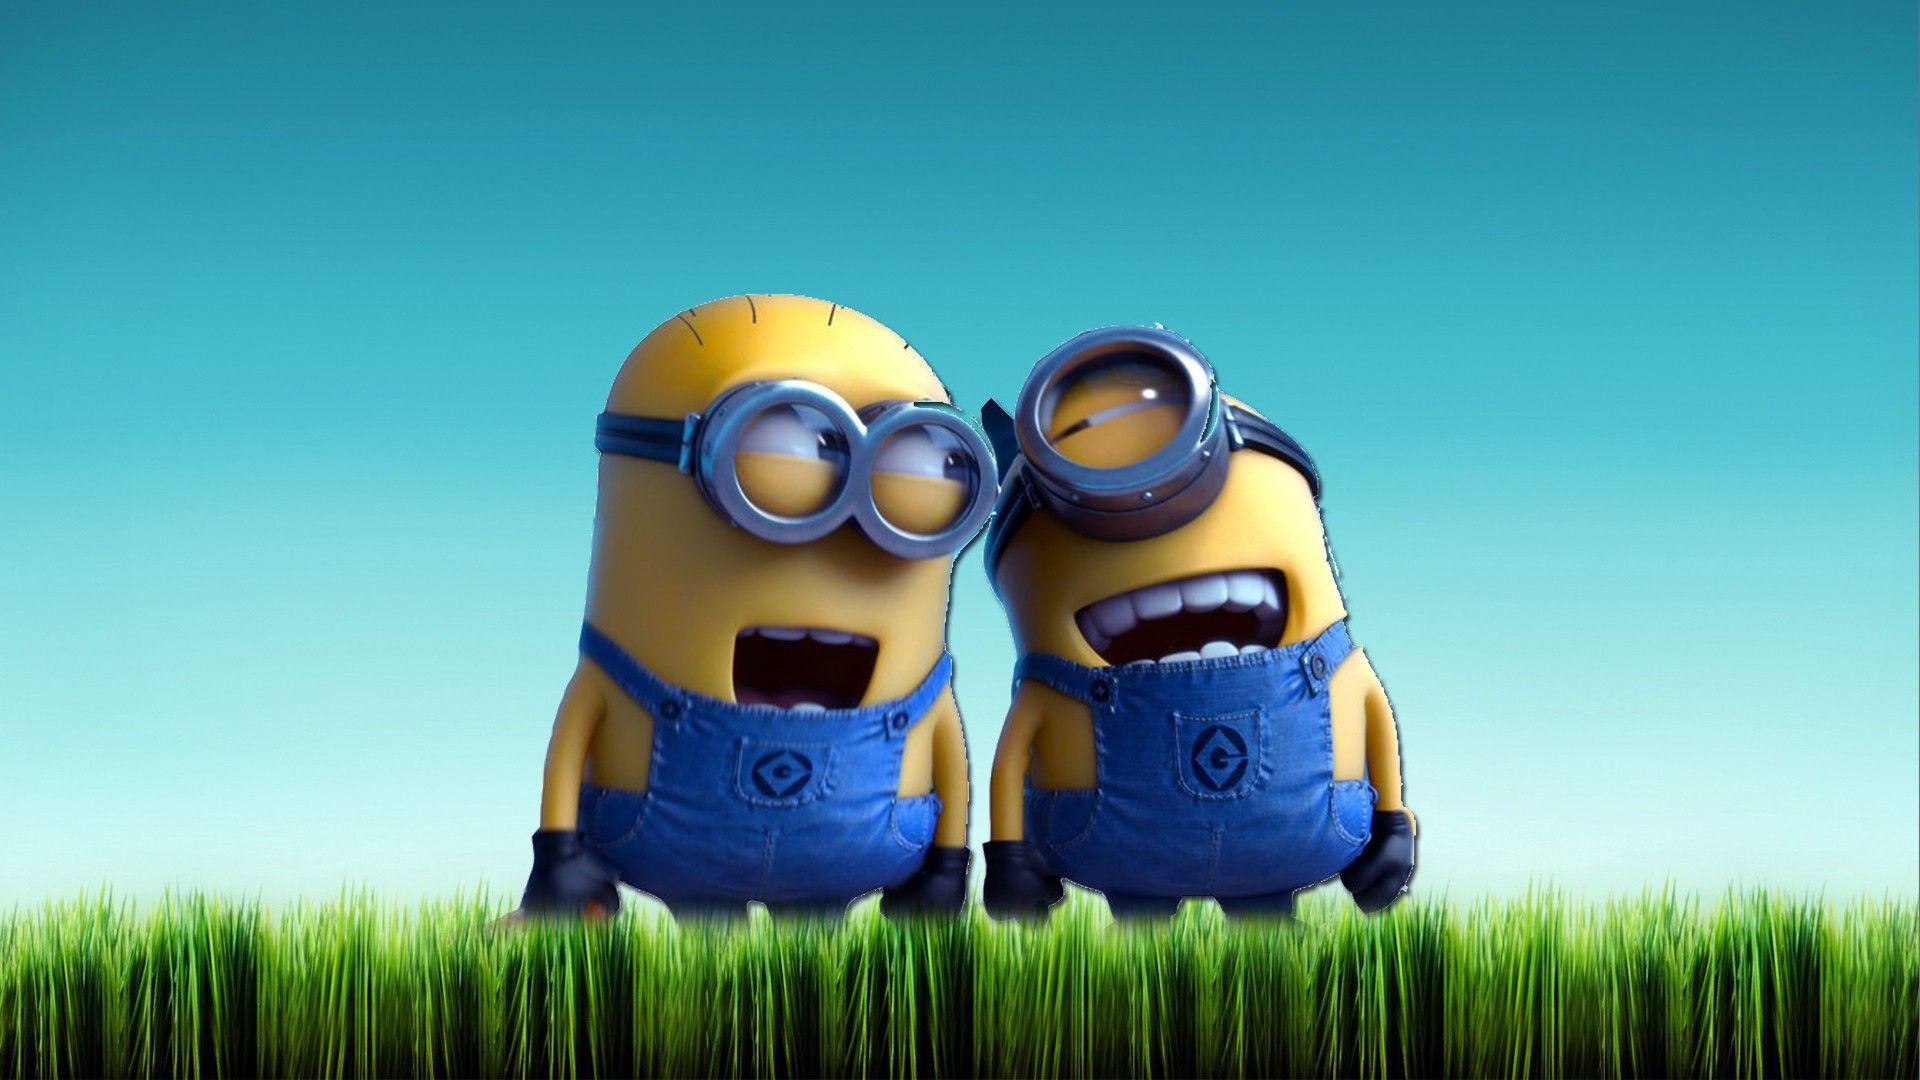 Minion Computer Wallpapers - Top Free Minion Computer Backgrounds